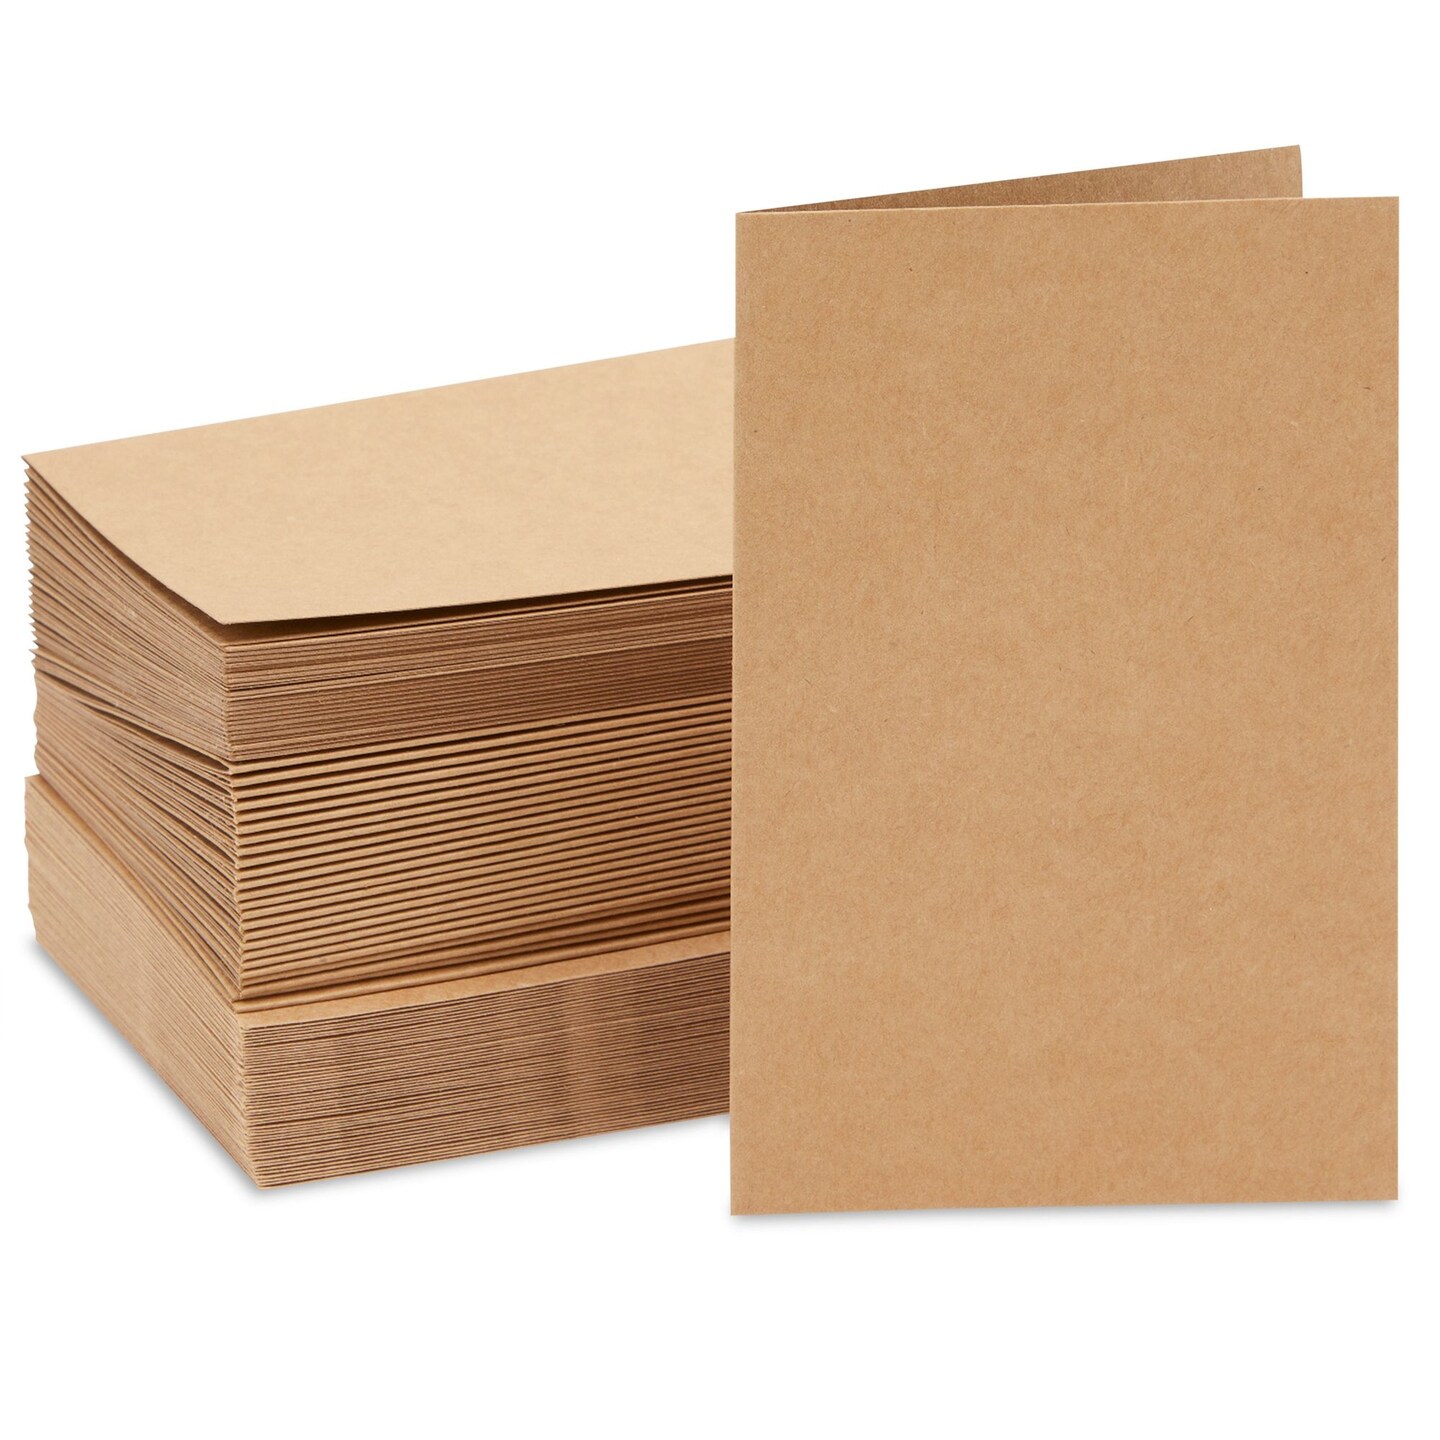 48 Pack Blank Cards and Envelopes 4x6 Brown, Folded Greeting Cards for DIY  Thank You Notes, Wedding, Birthday Invitations, Crafts (4x6 in)